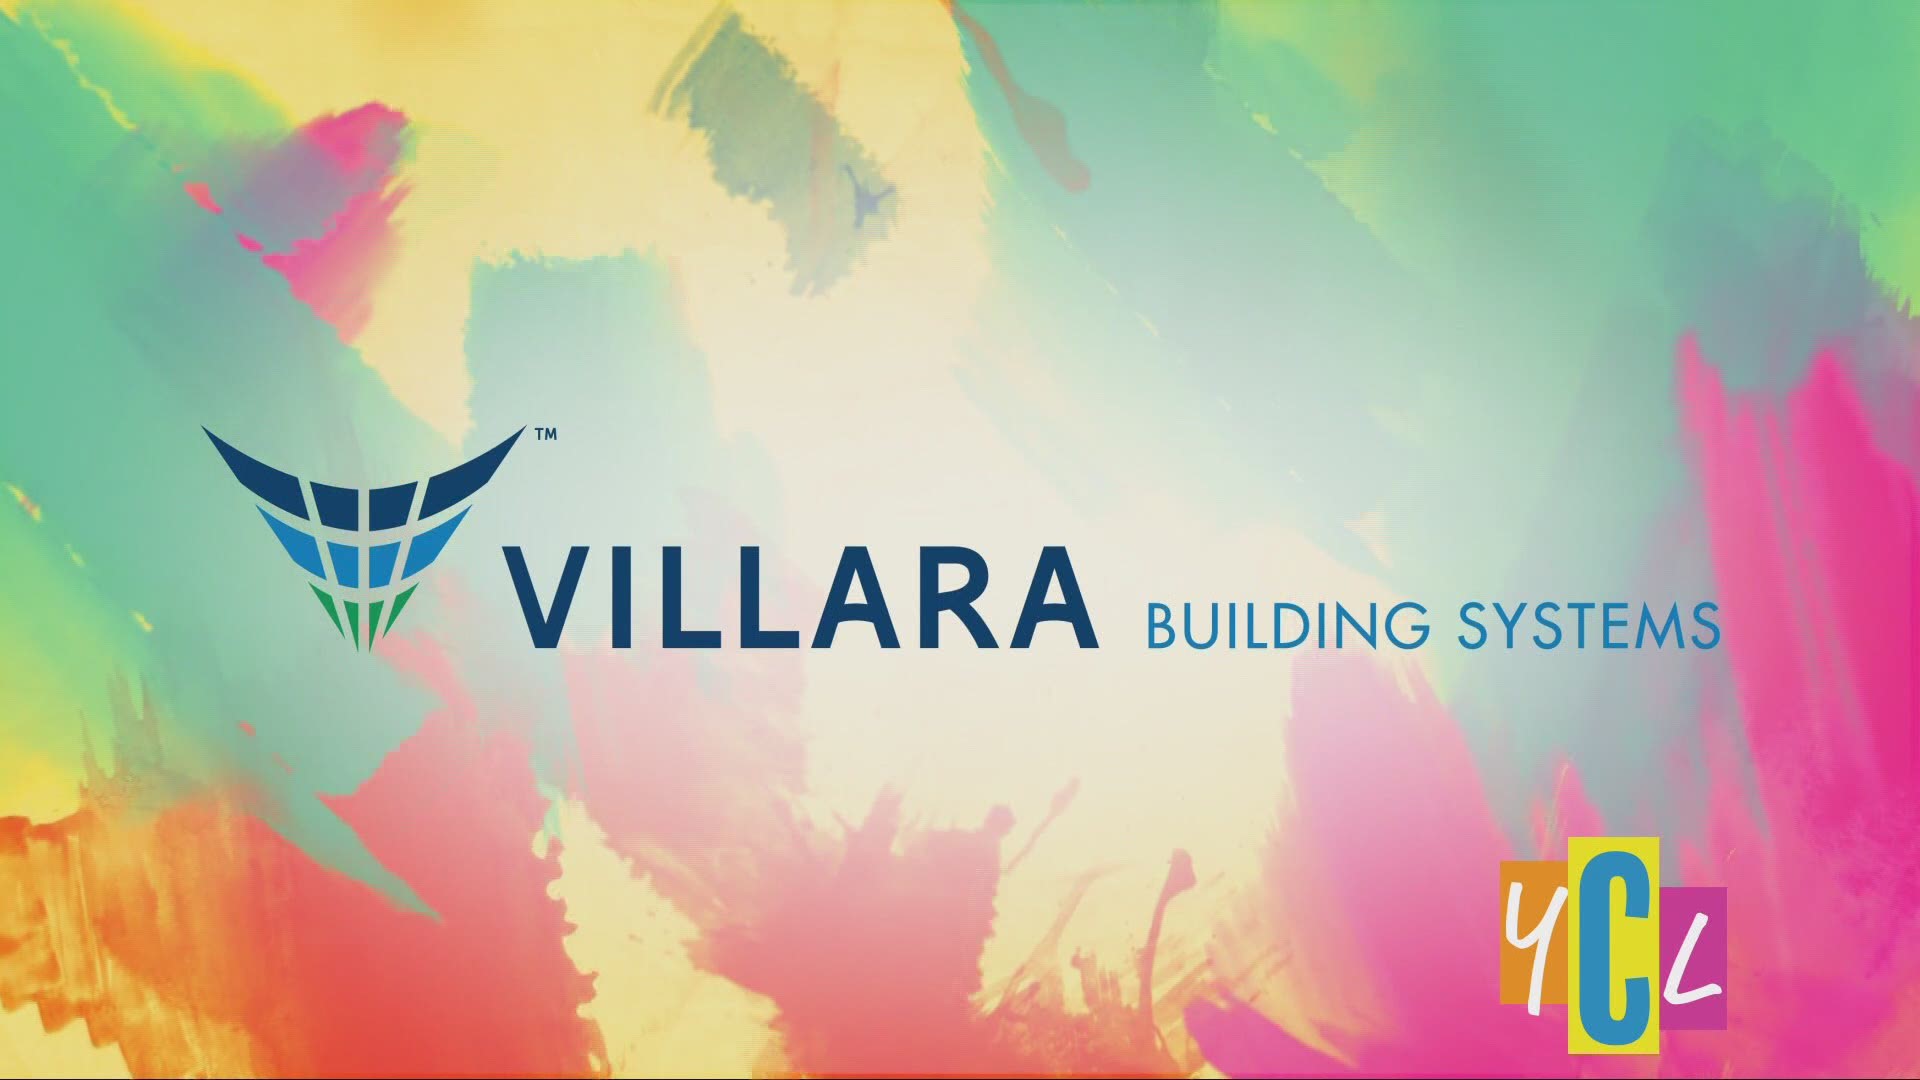 Villara Building Systems wants to hire up to 300 people at their hiring fair taking place Saturday, June 12. This segment was paid for by Villara Building Systems.